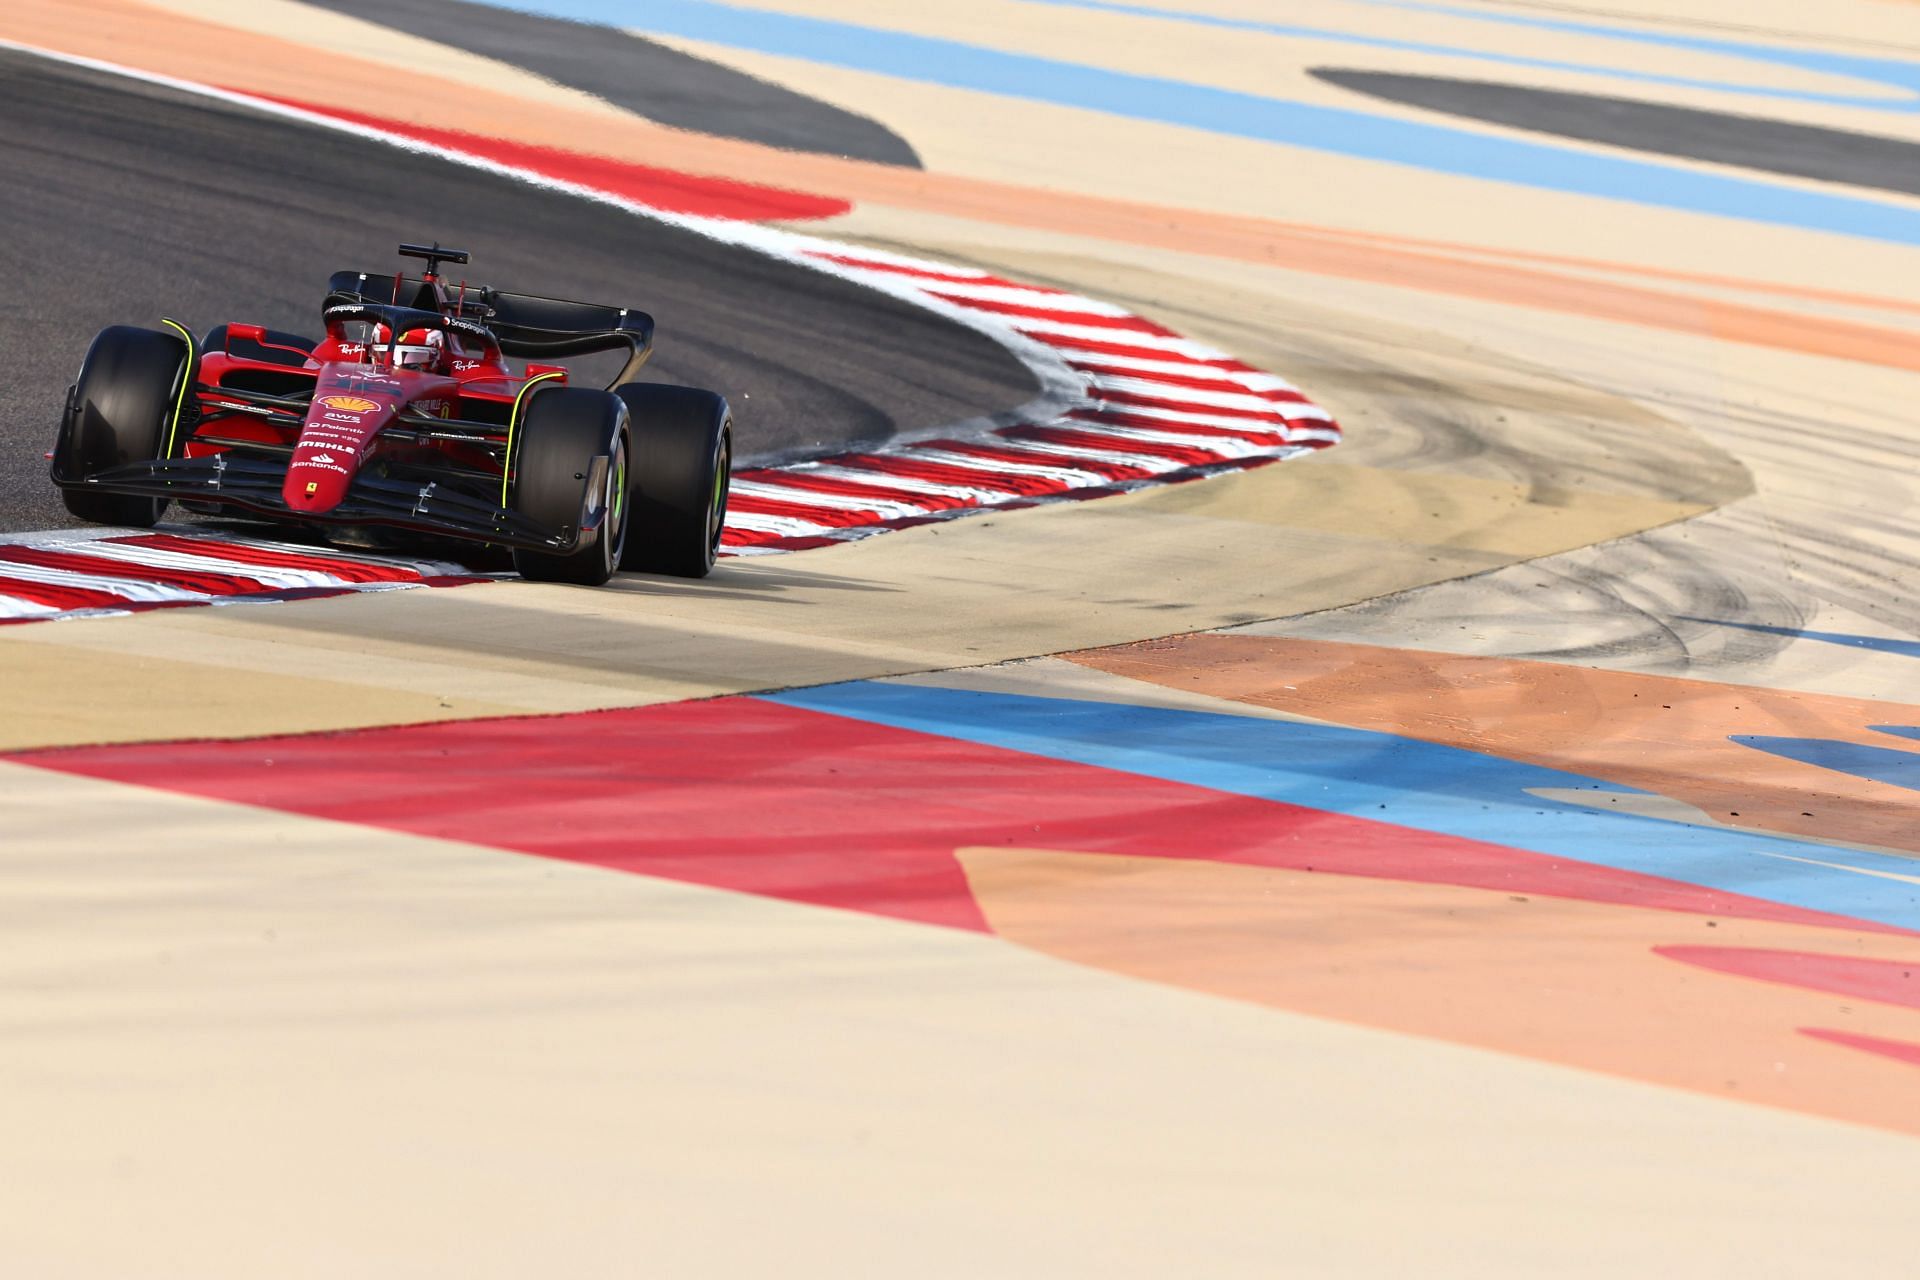 Charles Leclerc driving the Ferrari F1 -75 during pre-season testing in Bahrain (Photo by Mark Thompson/Getty Images)